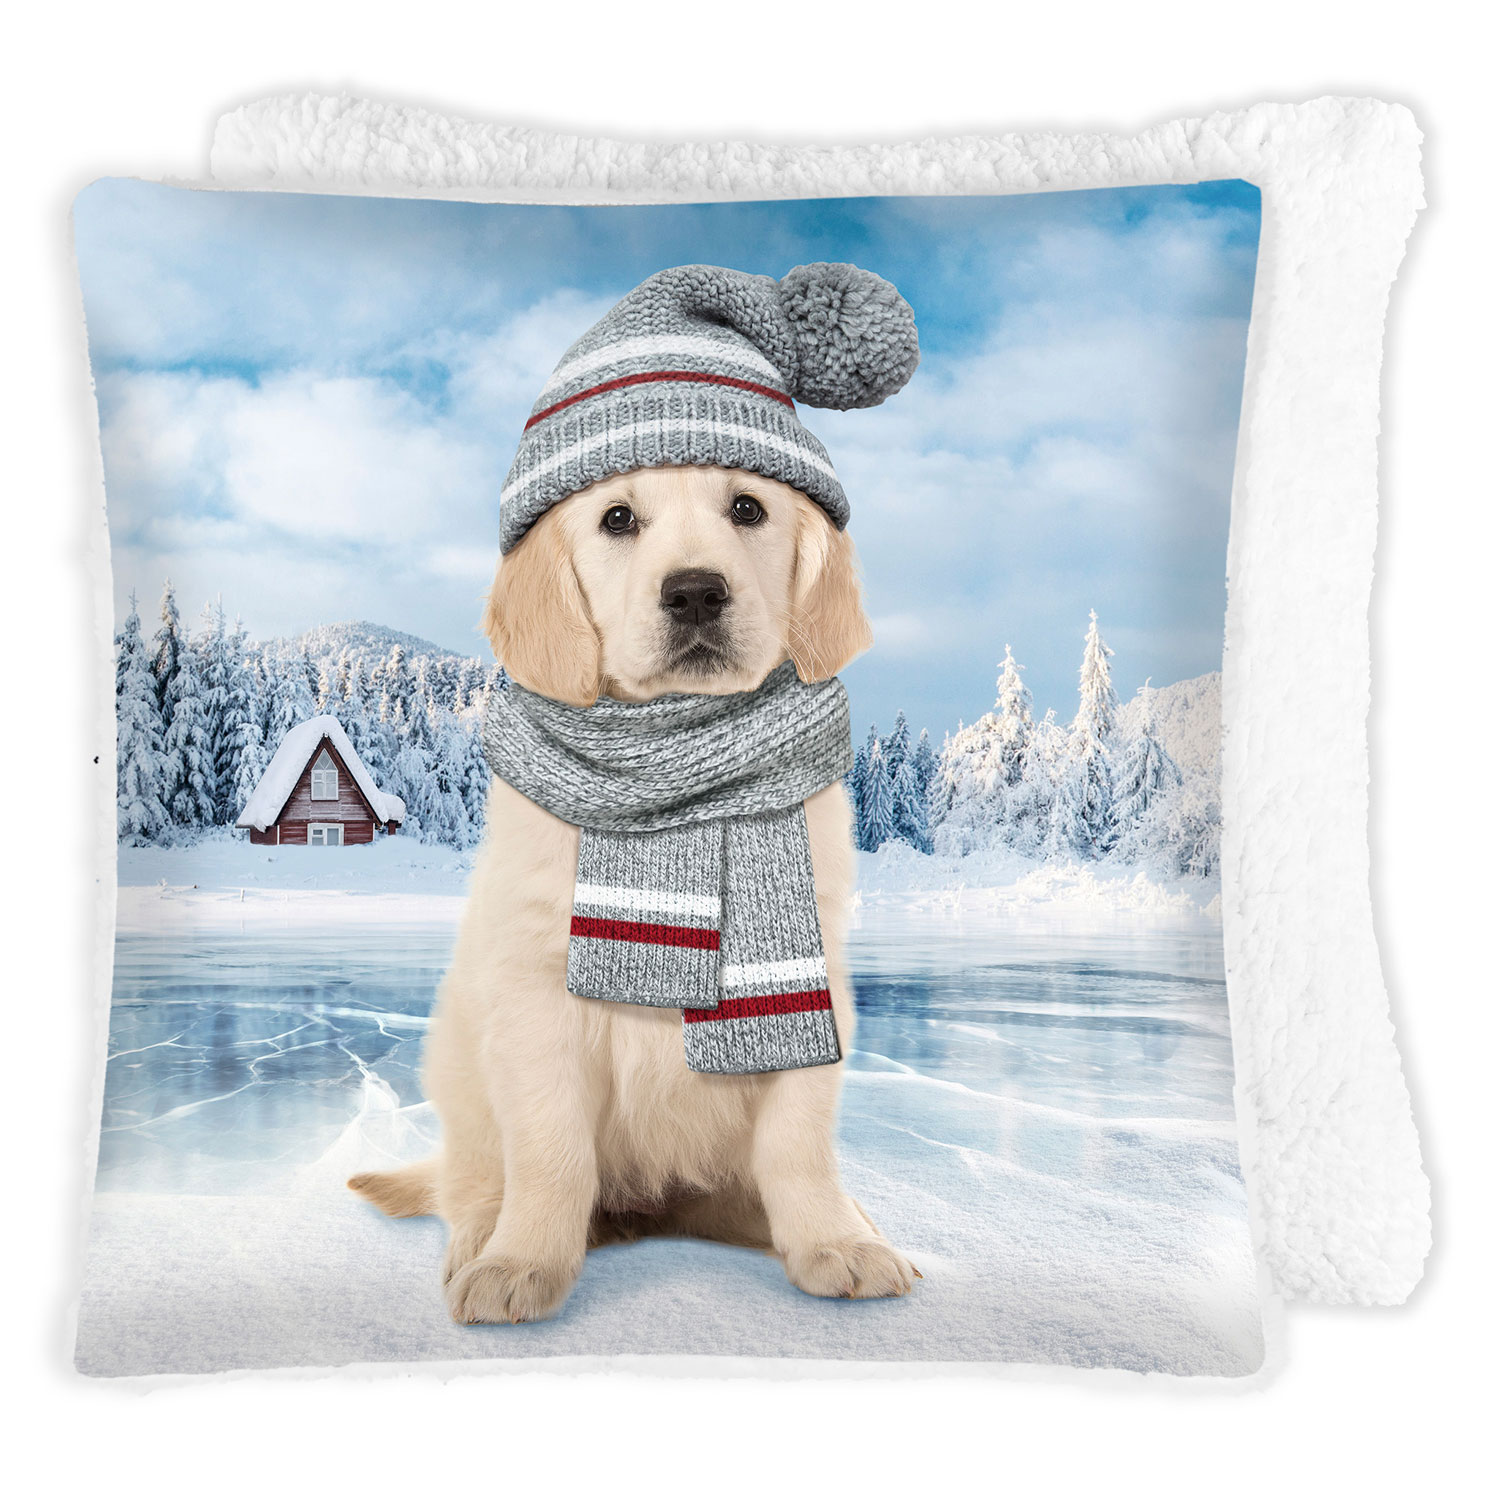 Printed photoreal cushion with sherpa backing, 17"x17" - Dog in toque